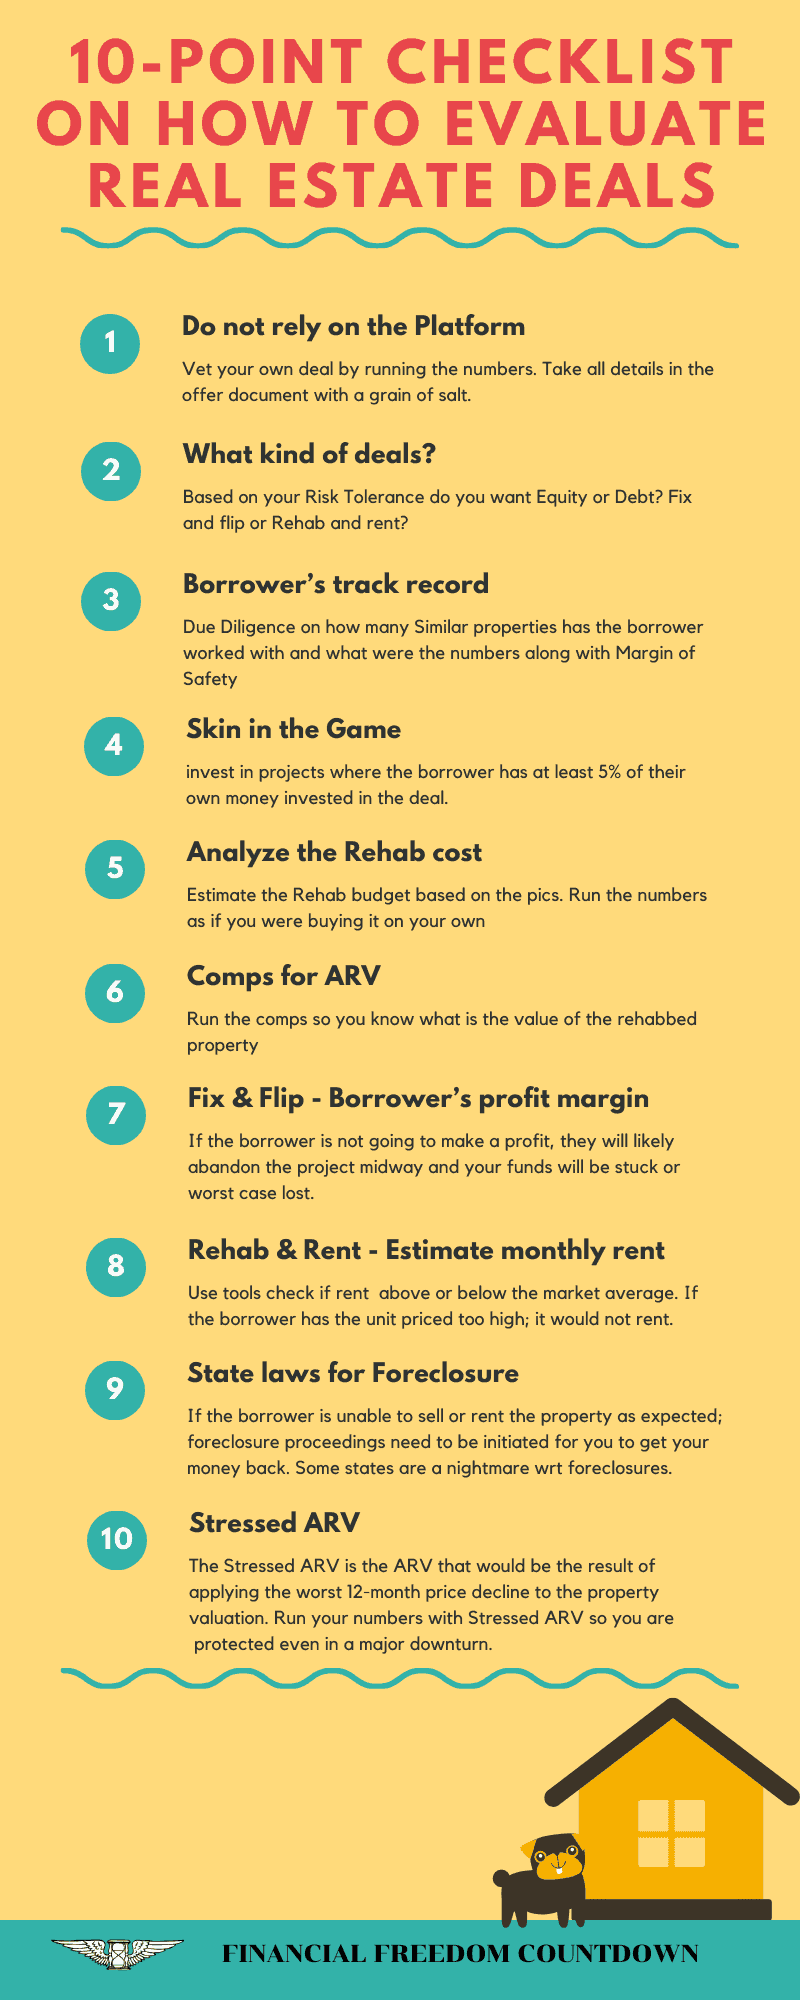 How To Invest In Real Estate Crowdfunding using a 10 Point Checklist